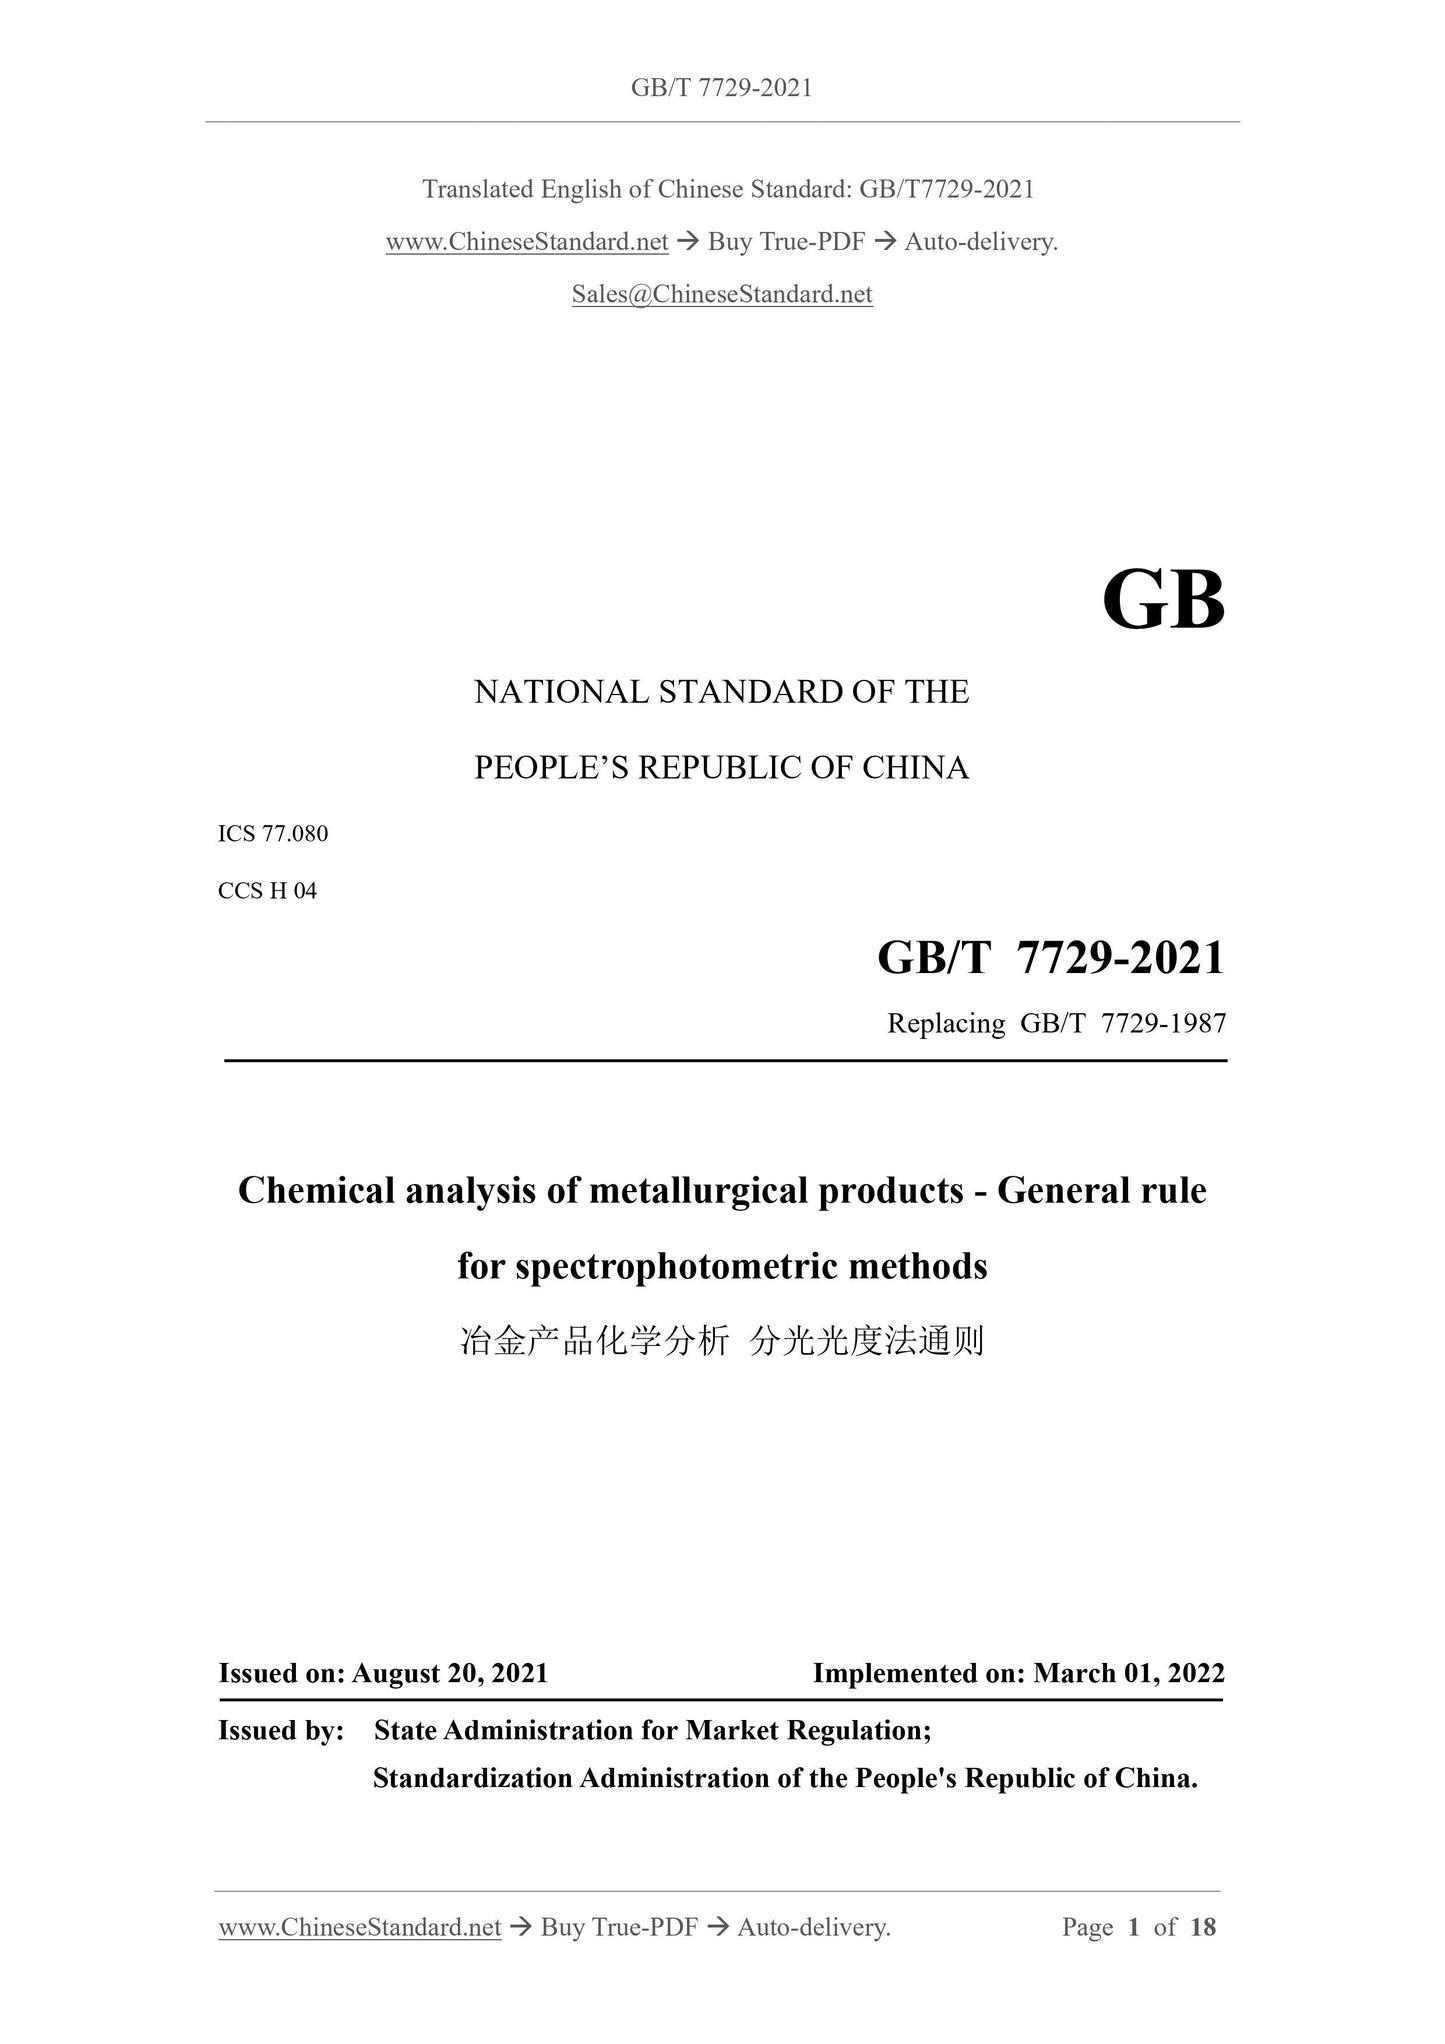 GB/T 7729-2021 Page 1